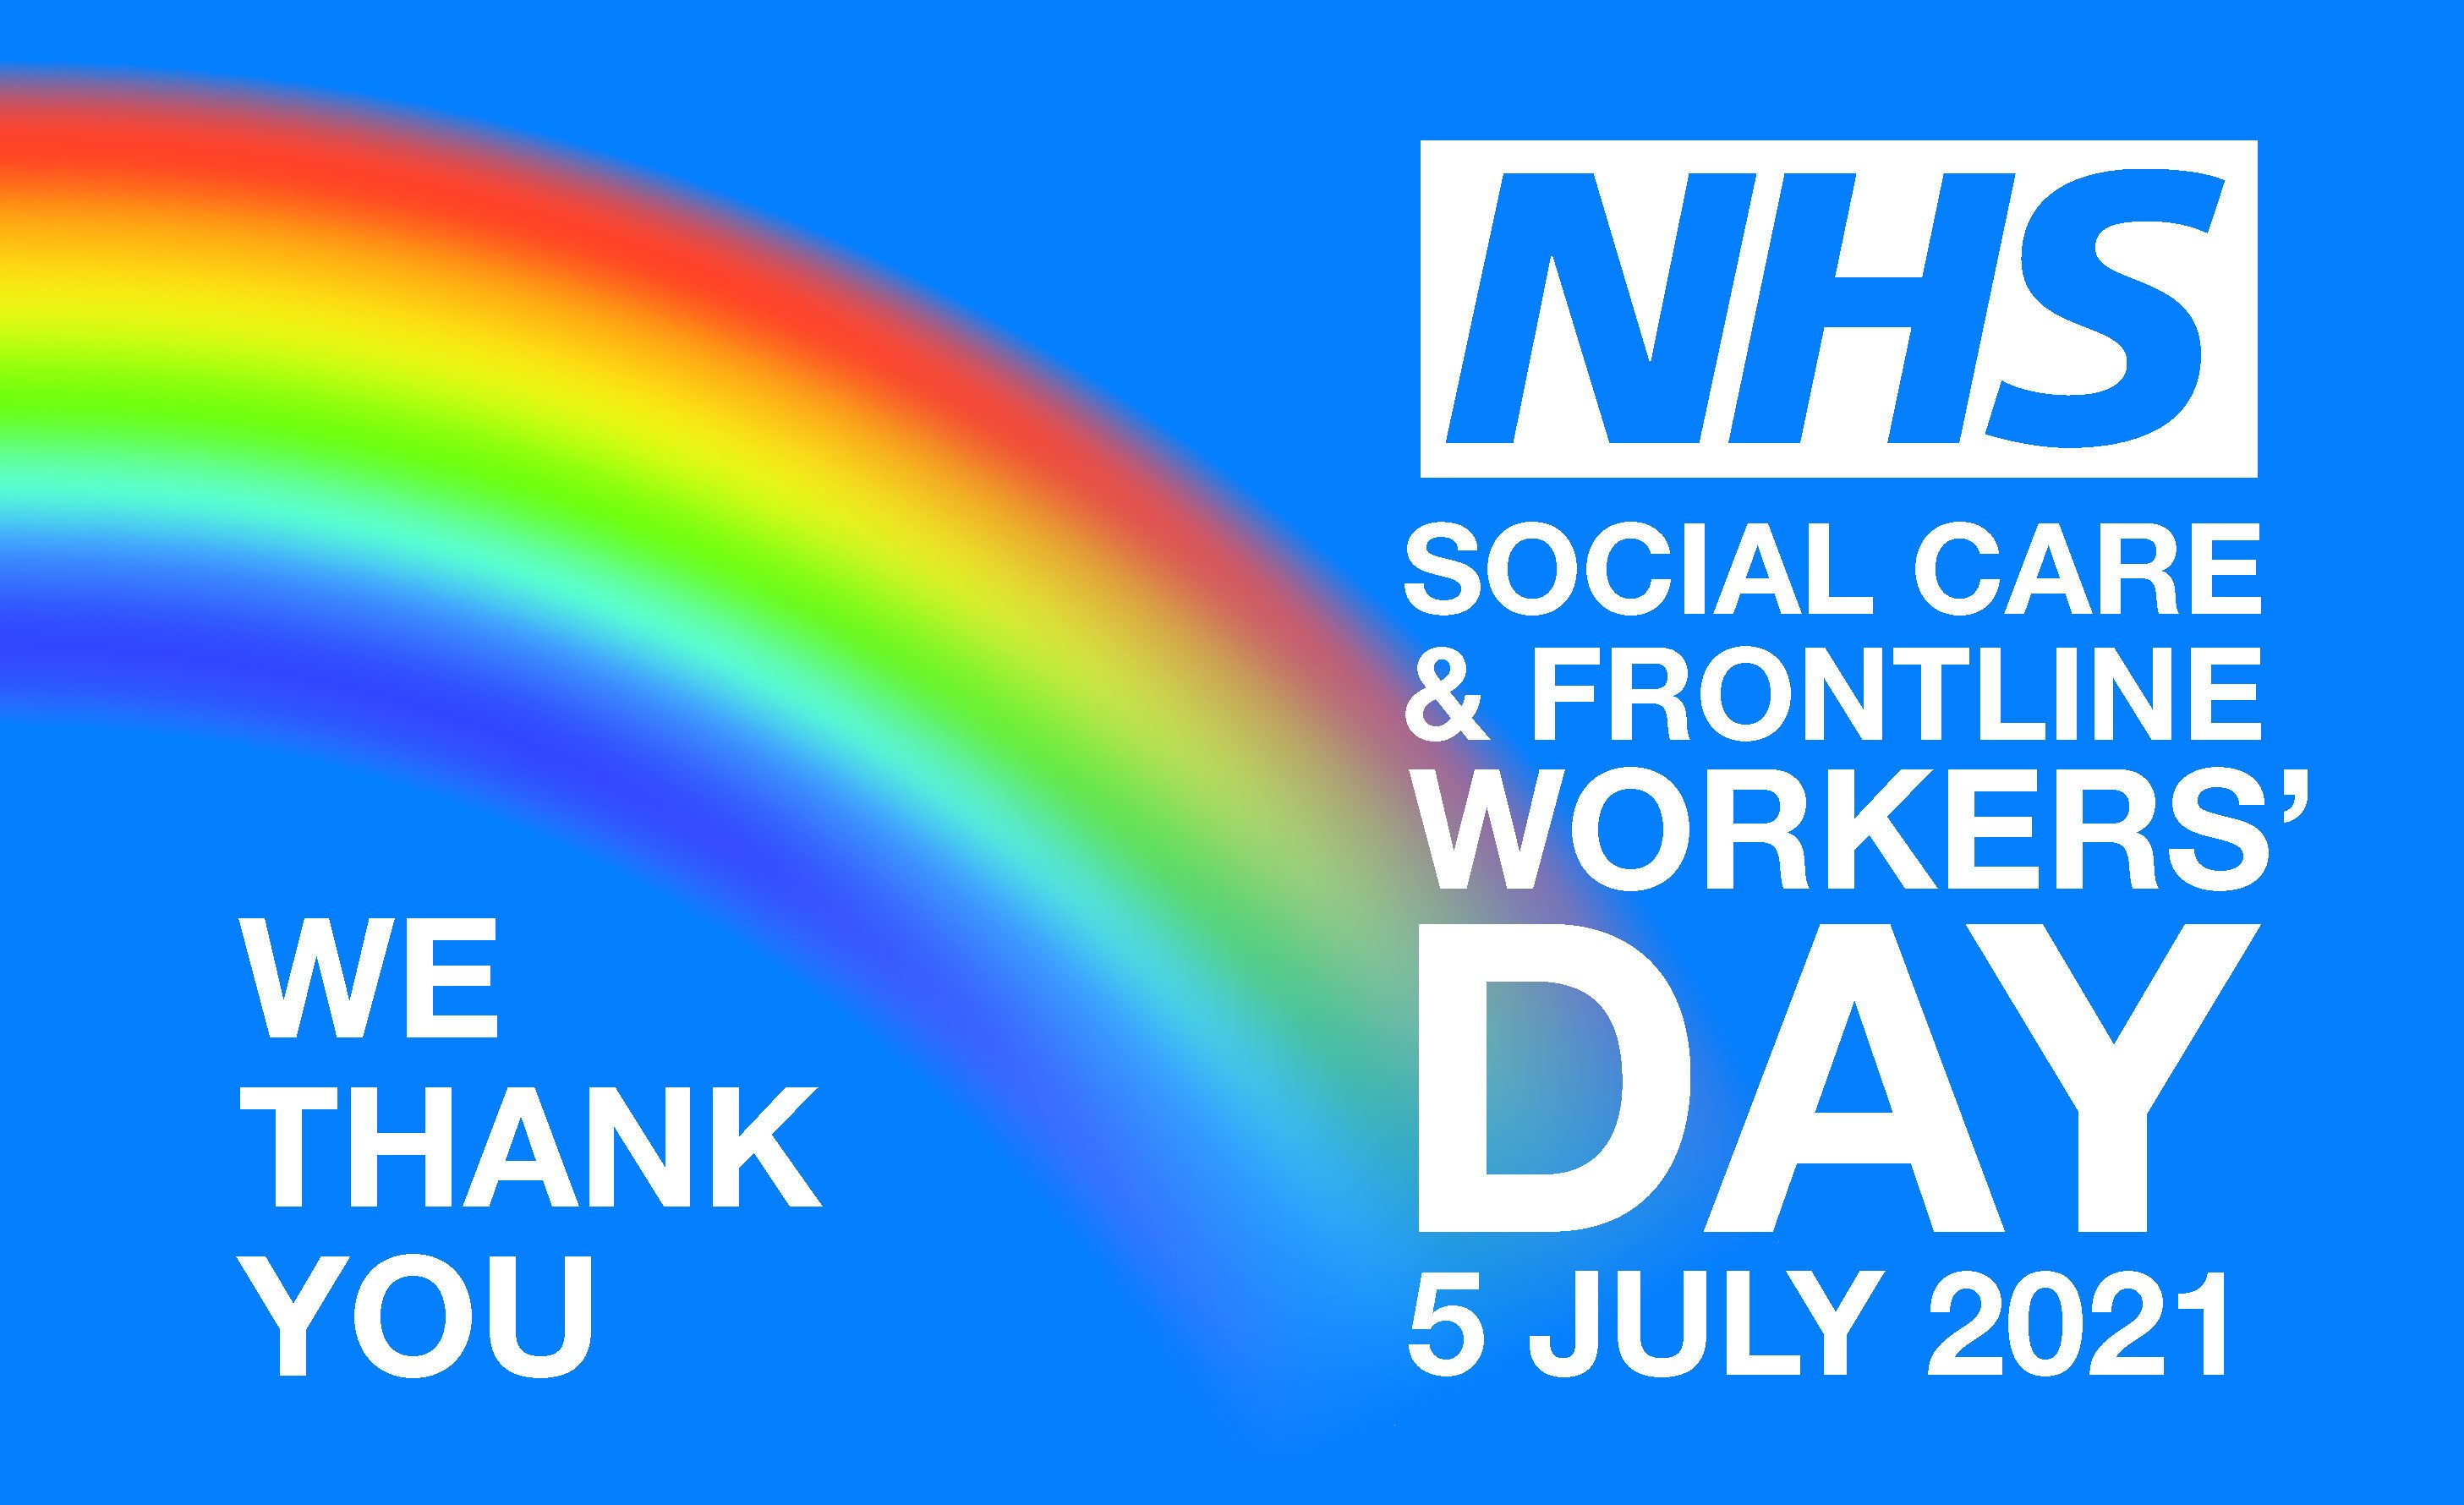 NHS, Social Care and Frontline Workers’ Day - NHS Frontline Day